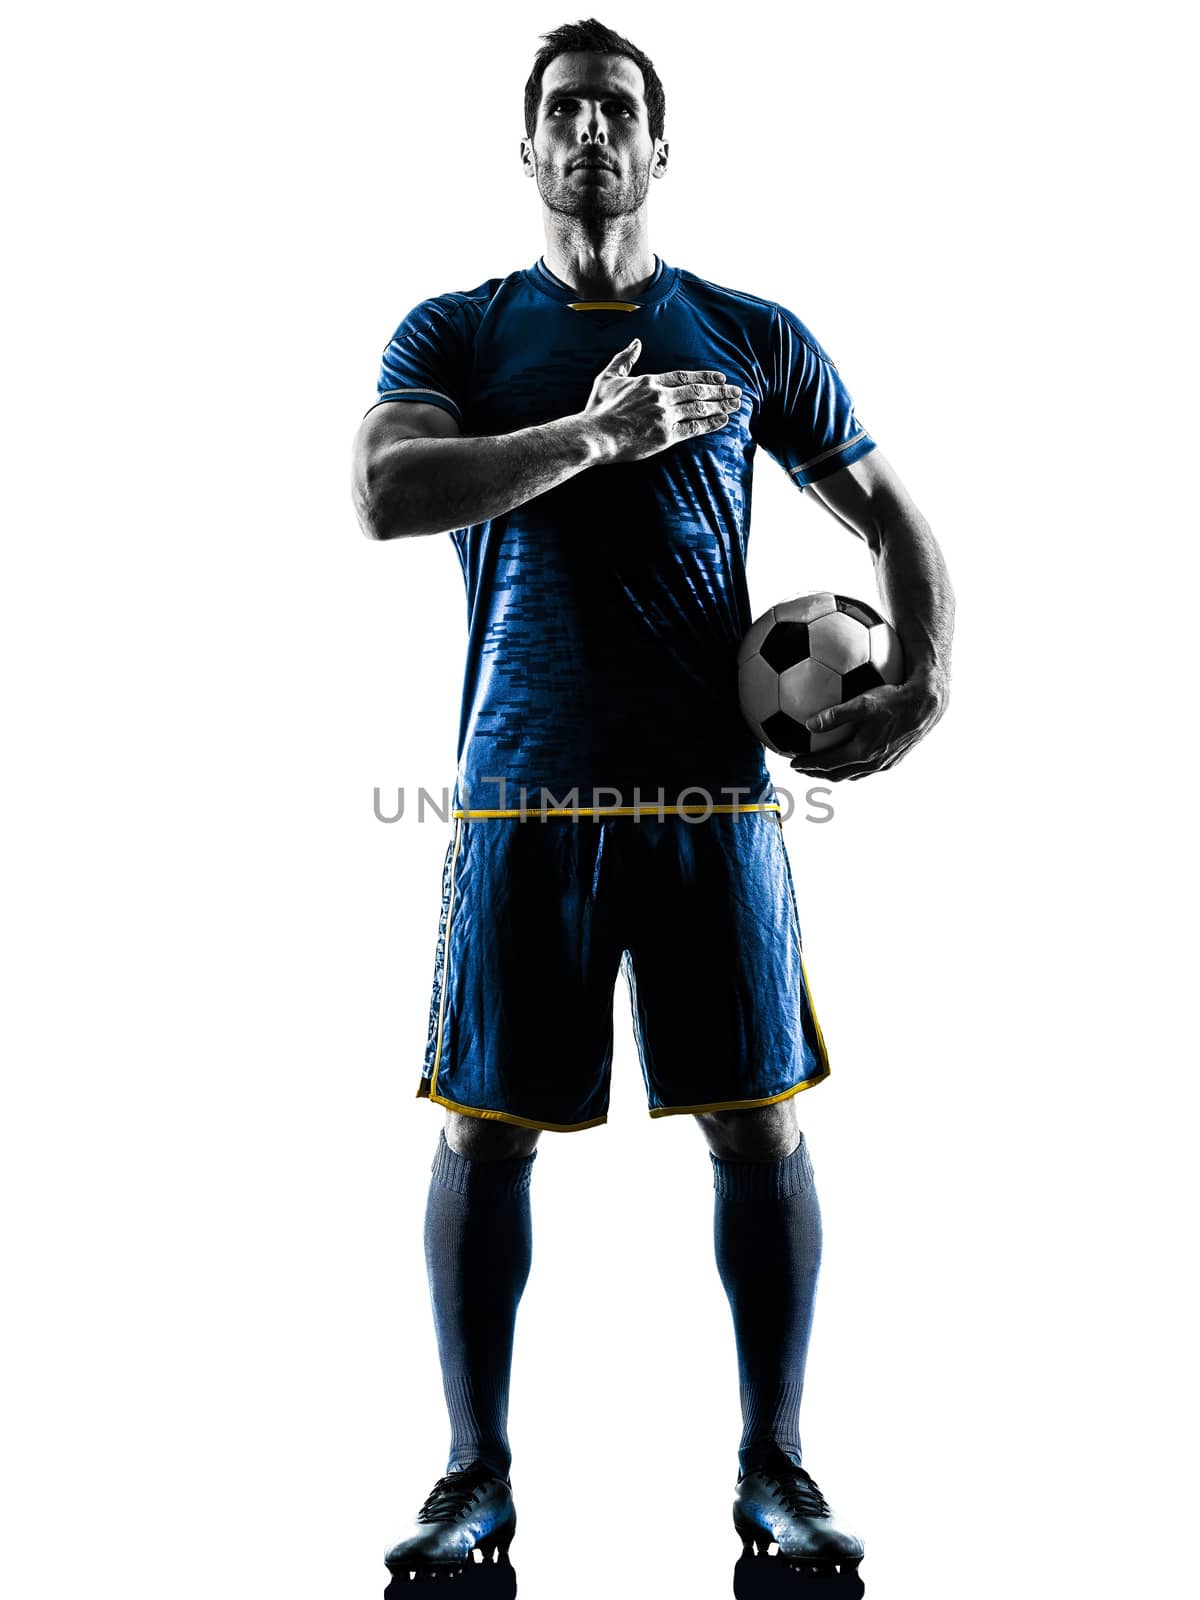 one caucasian soccer player man playing in silhouette isolated on white background